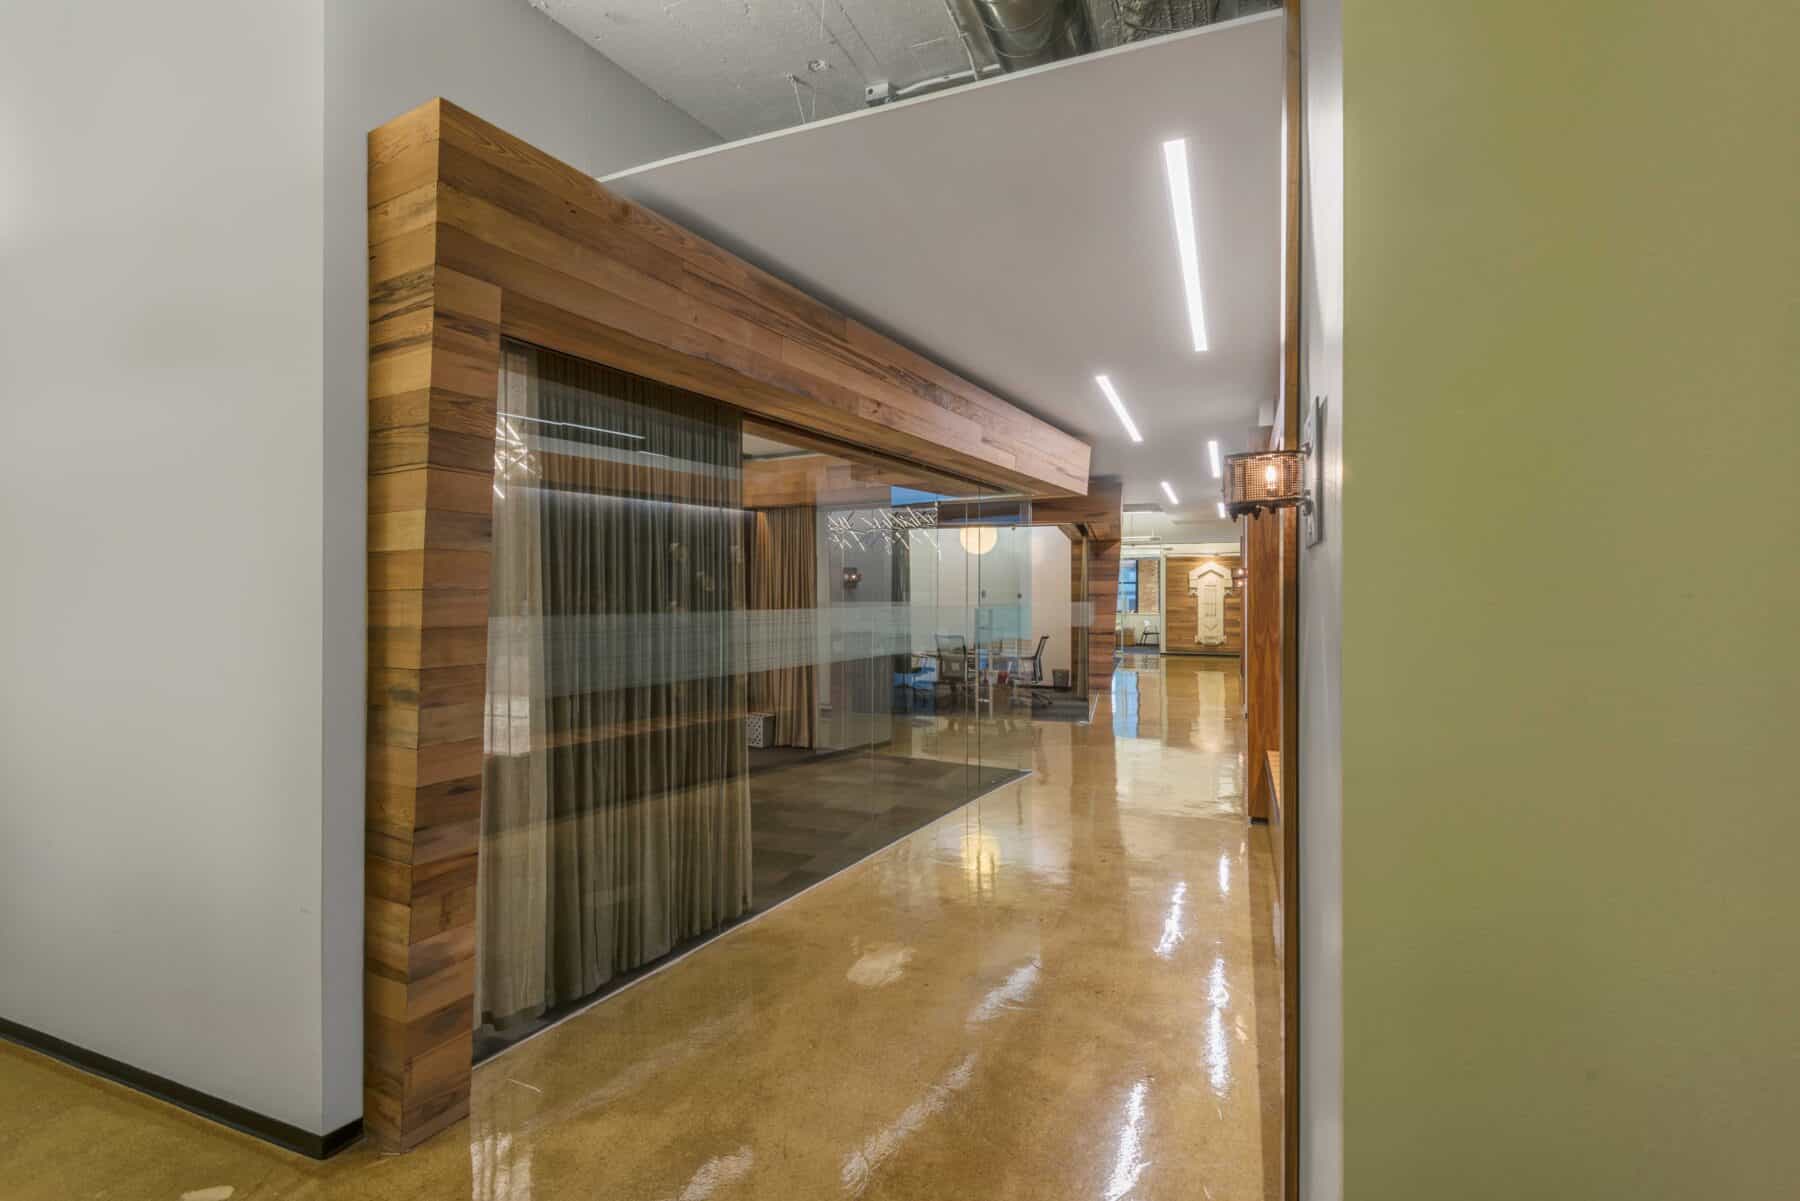 Custom Fabrication of Glass Conference Rooms with Reclaimed Wood for an Office from Construction Specialty Projects by Commercial Builder & General Contractor Structural Enterprises